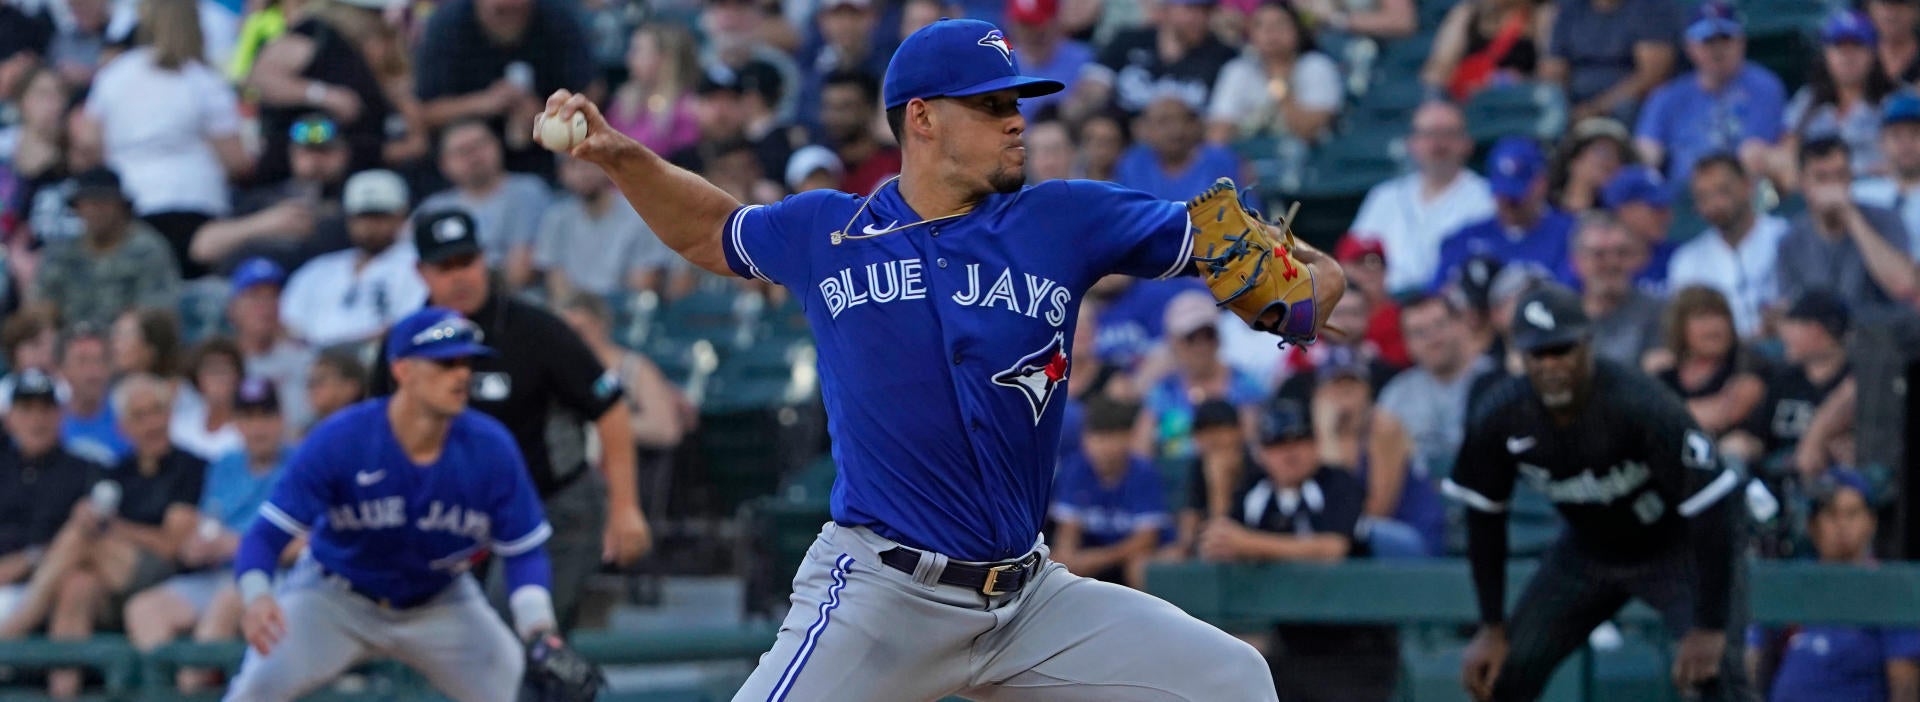 Royals vs. Blue Jays odds, picks: Advanced computer MLB model releases selections for Sunday matchup